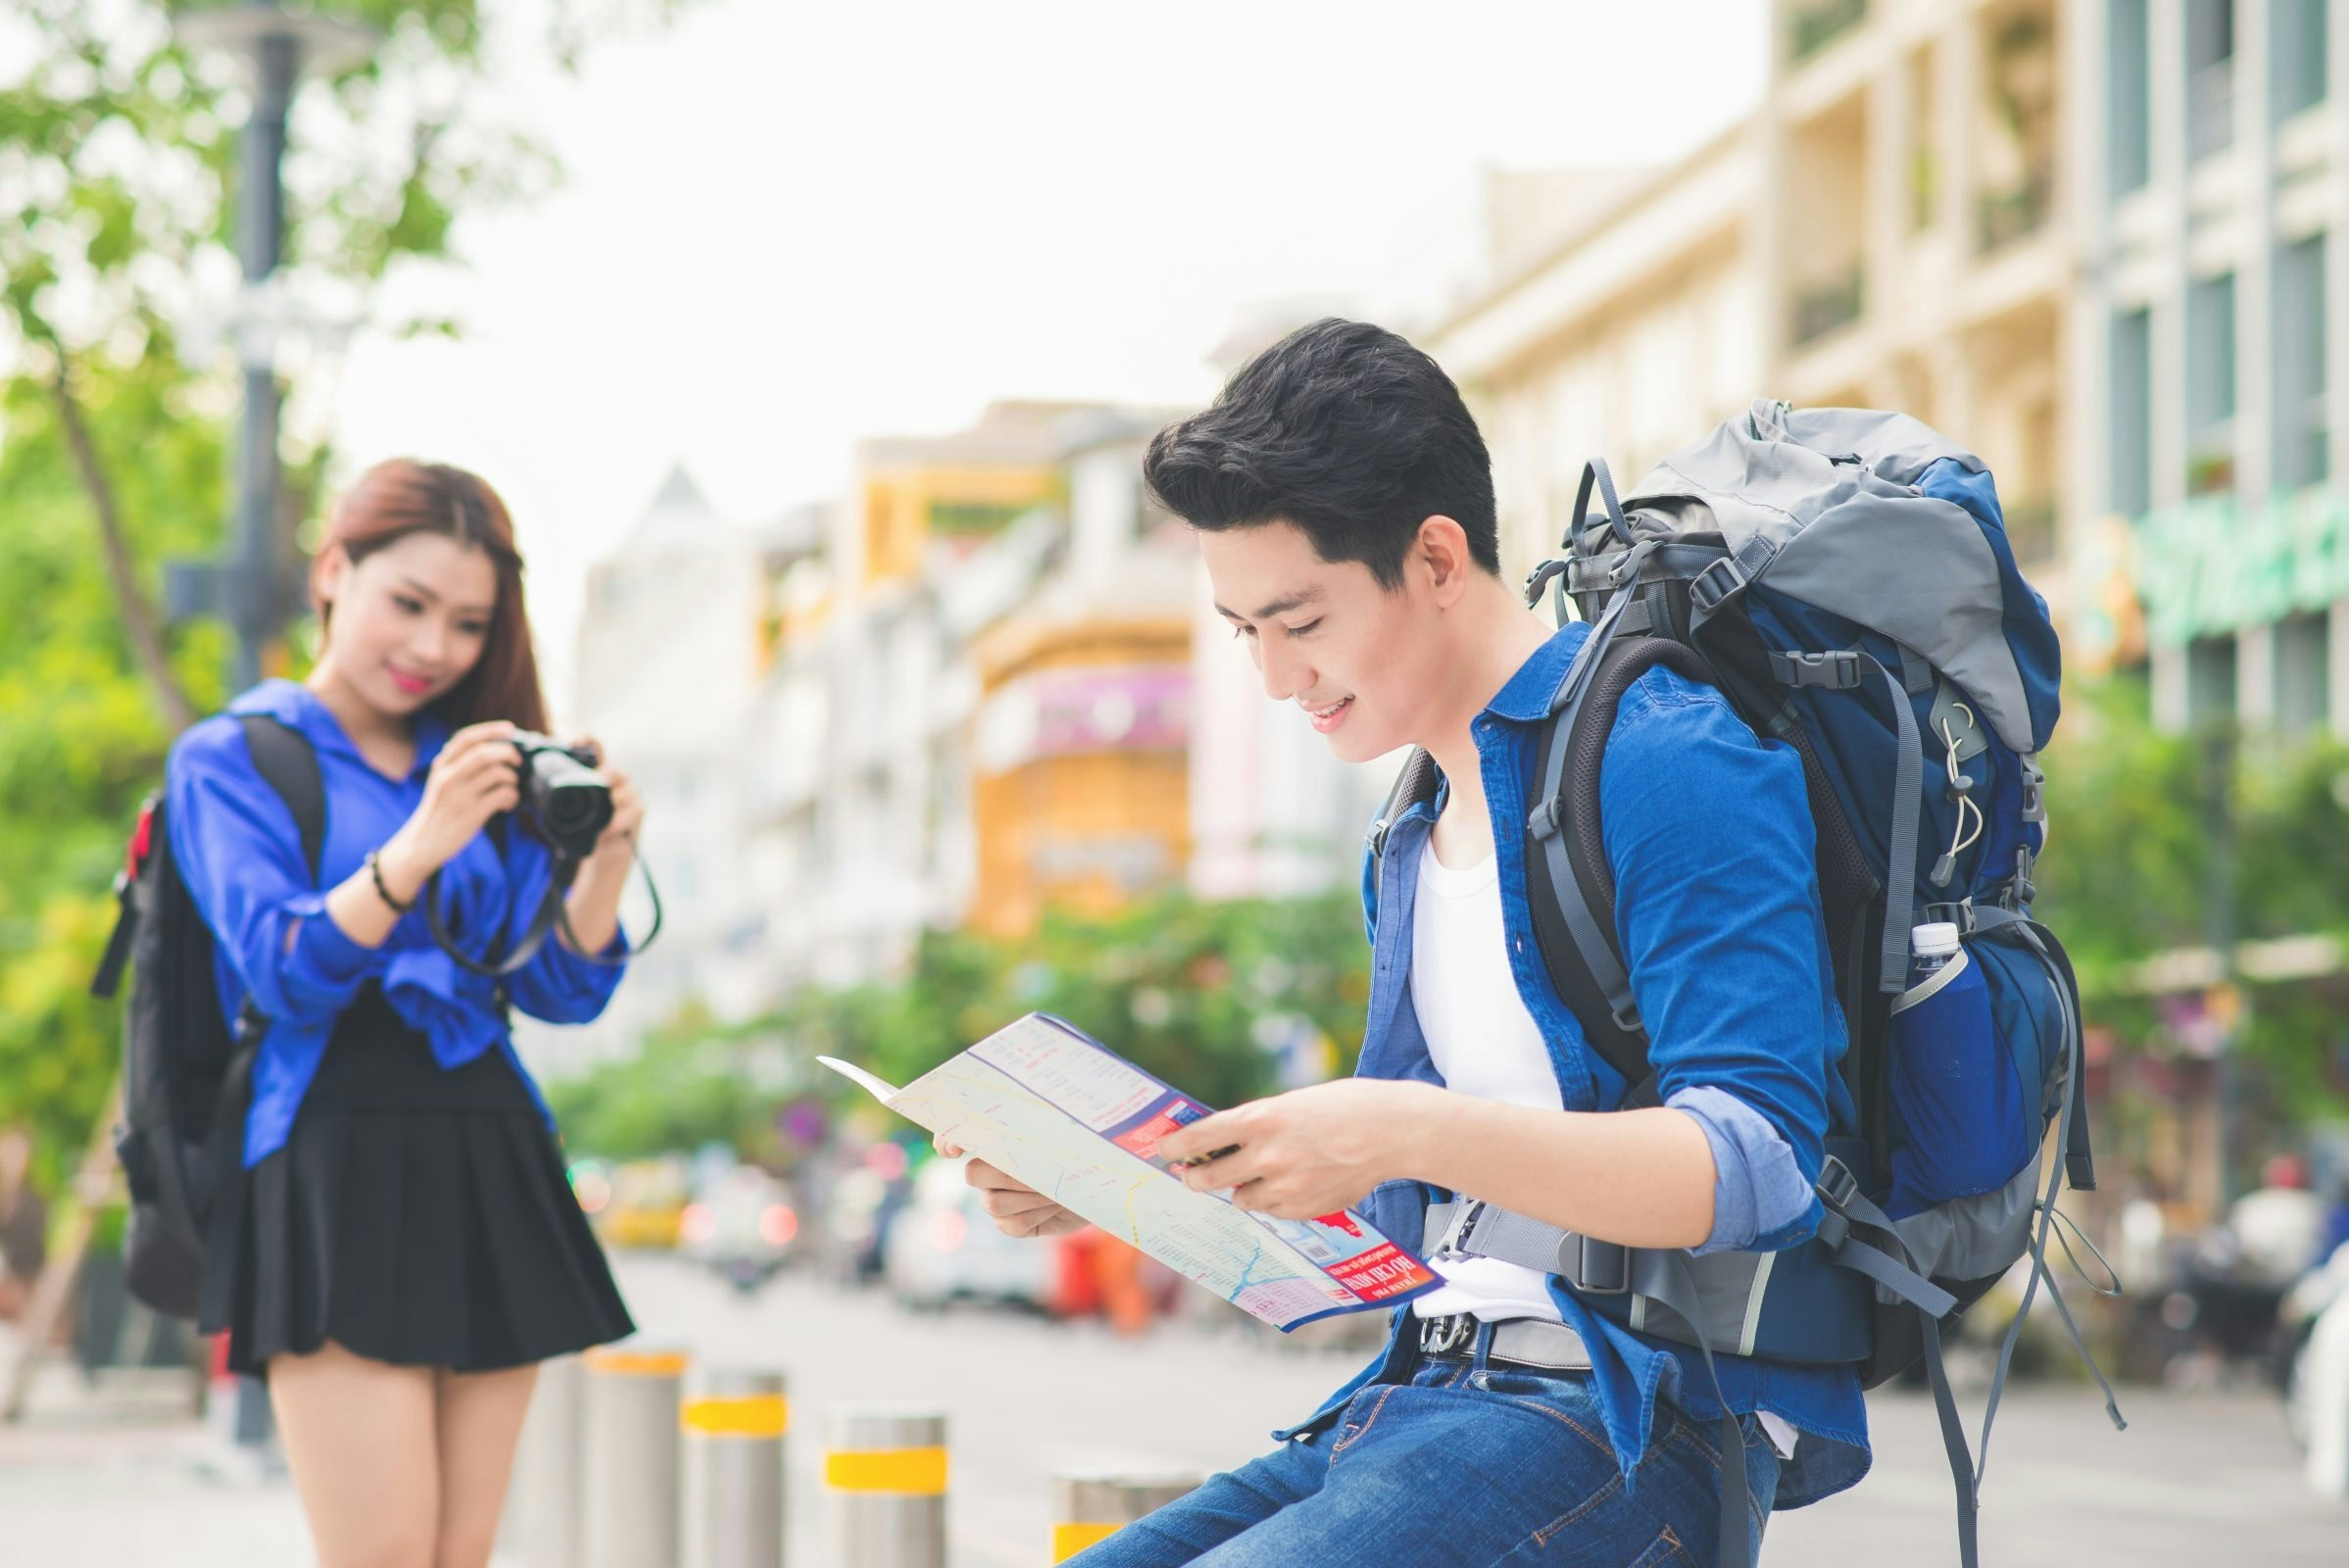 Chinese travelers provide insights into their booking and travel preferences. (Makistock / Shutterstock.com)